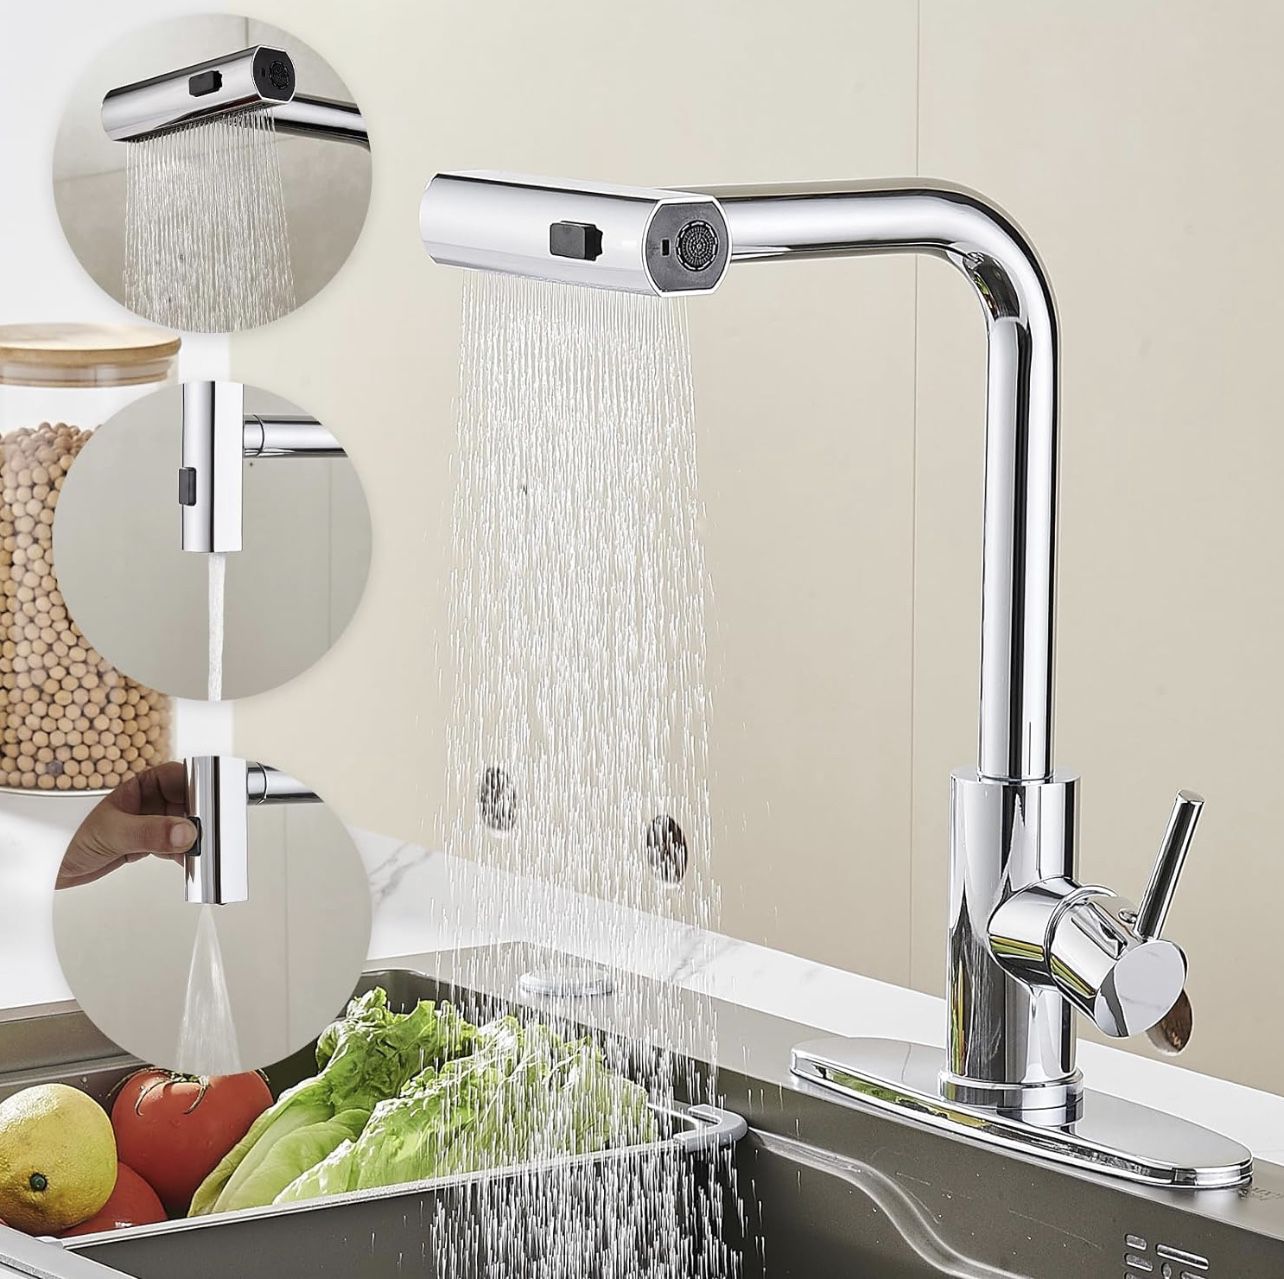 AVSIILE Kitchen Faucet with Pull Down Sprayer, Chrome Waterfall Touch Single Hole